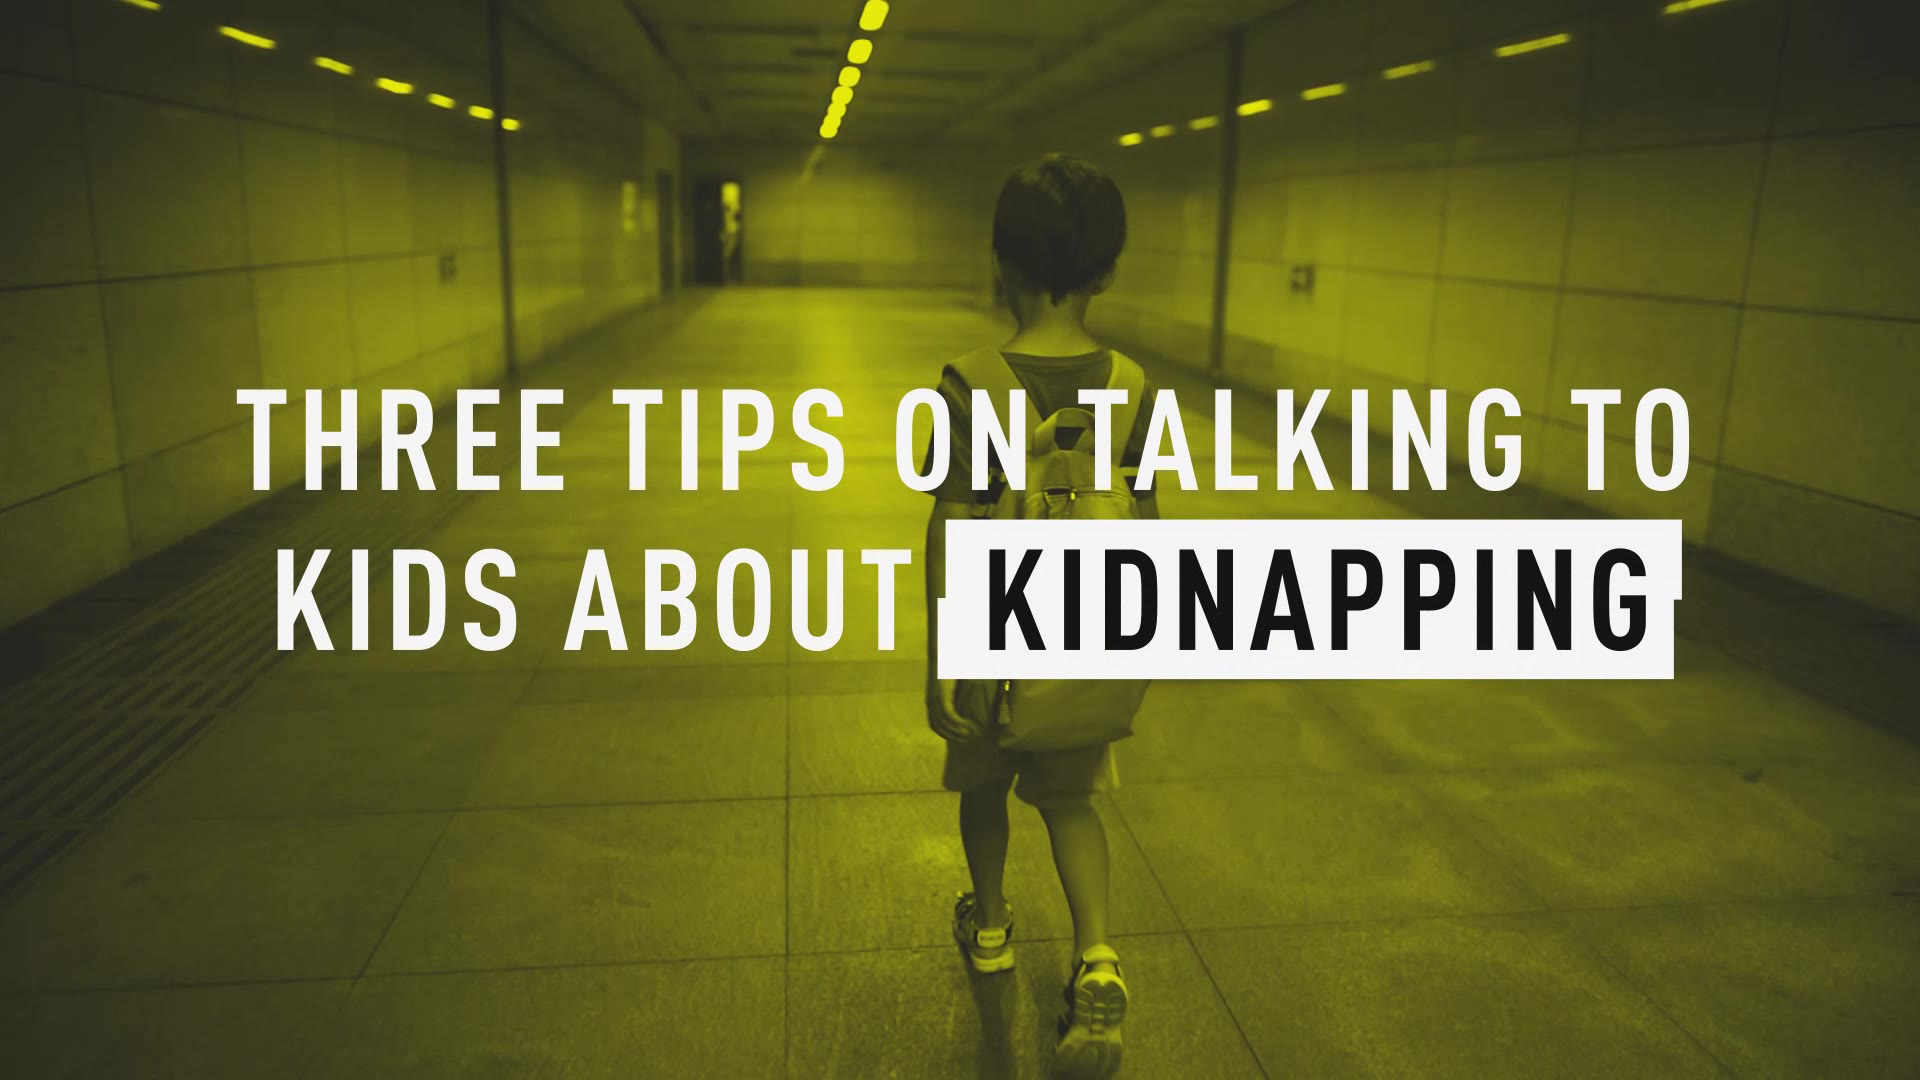 How To Stay Safe From Kidnapping